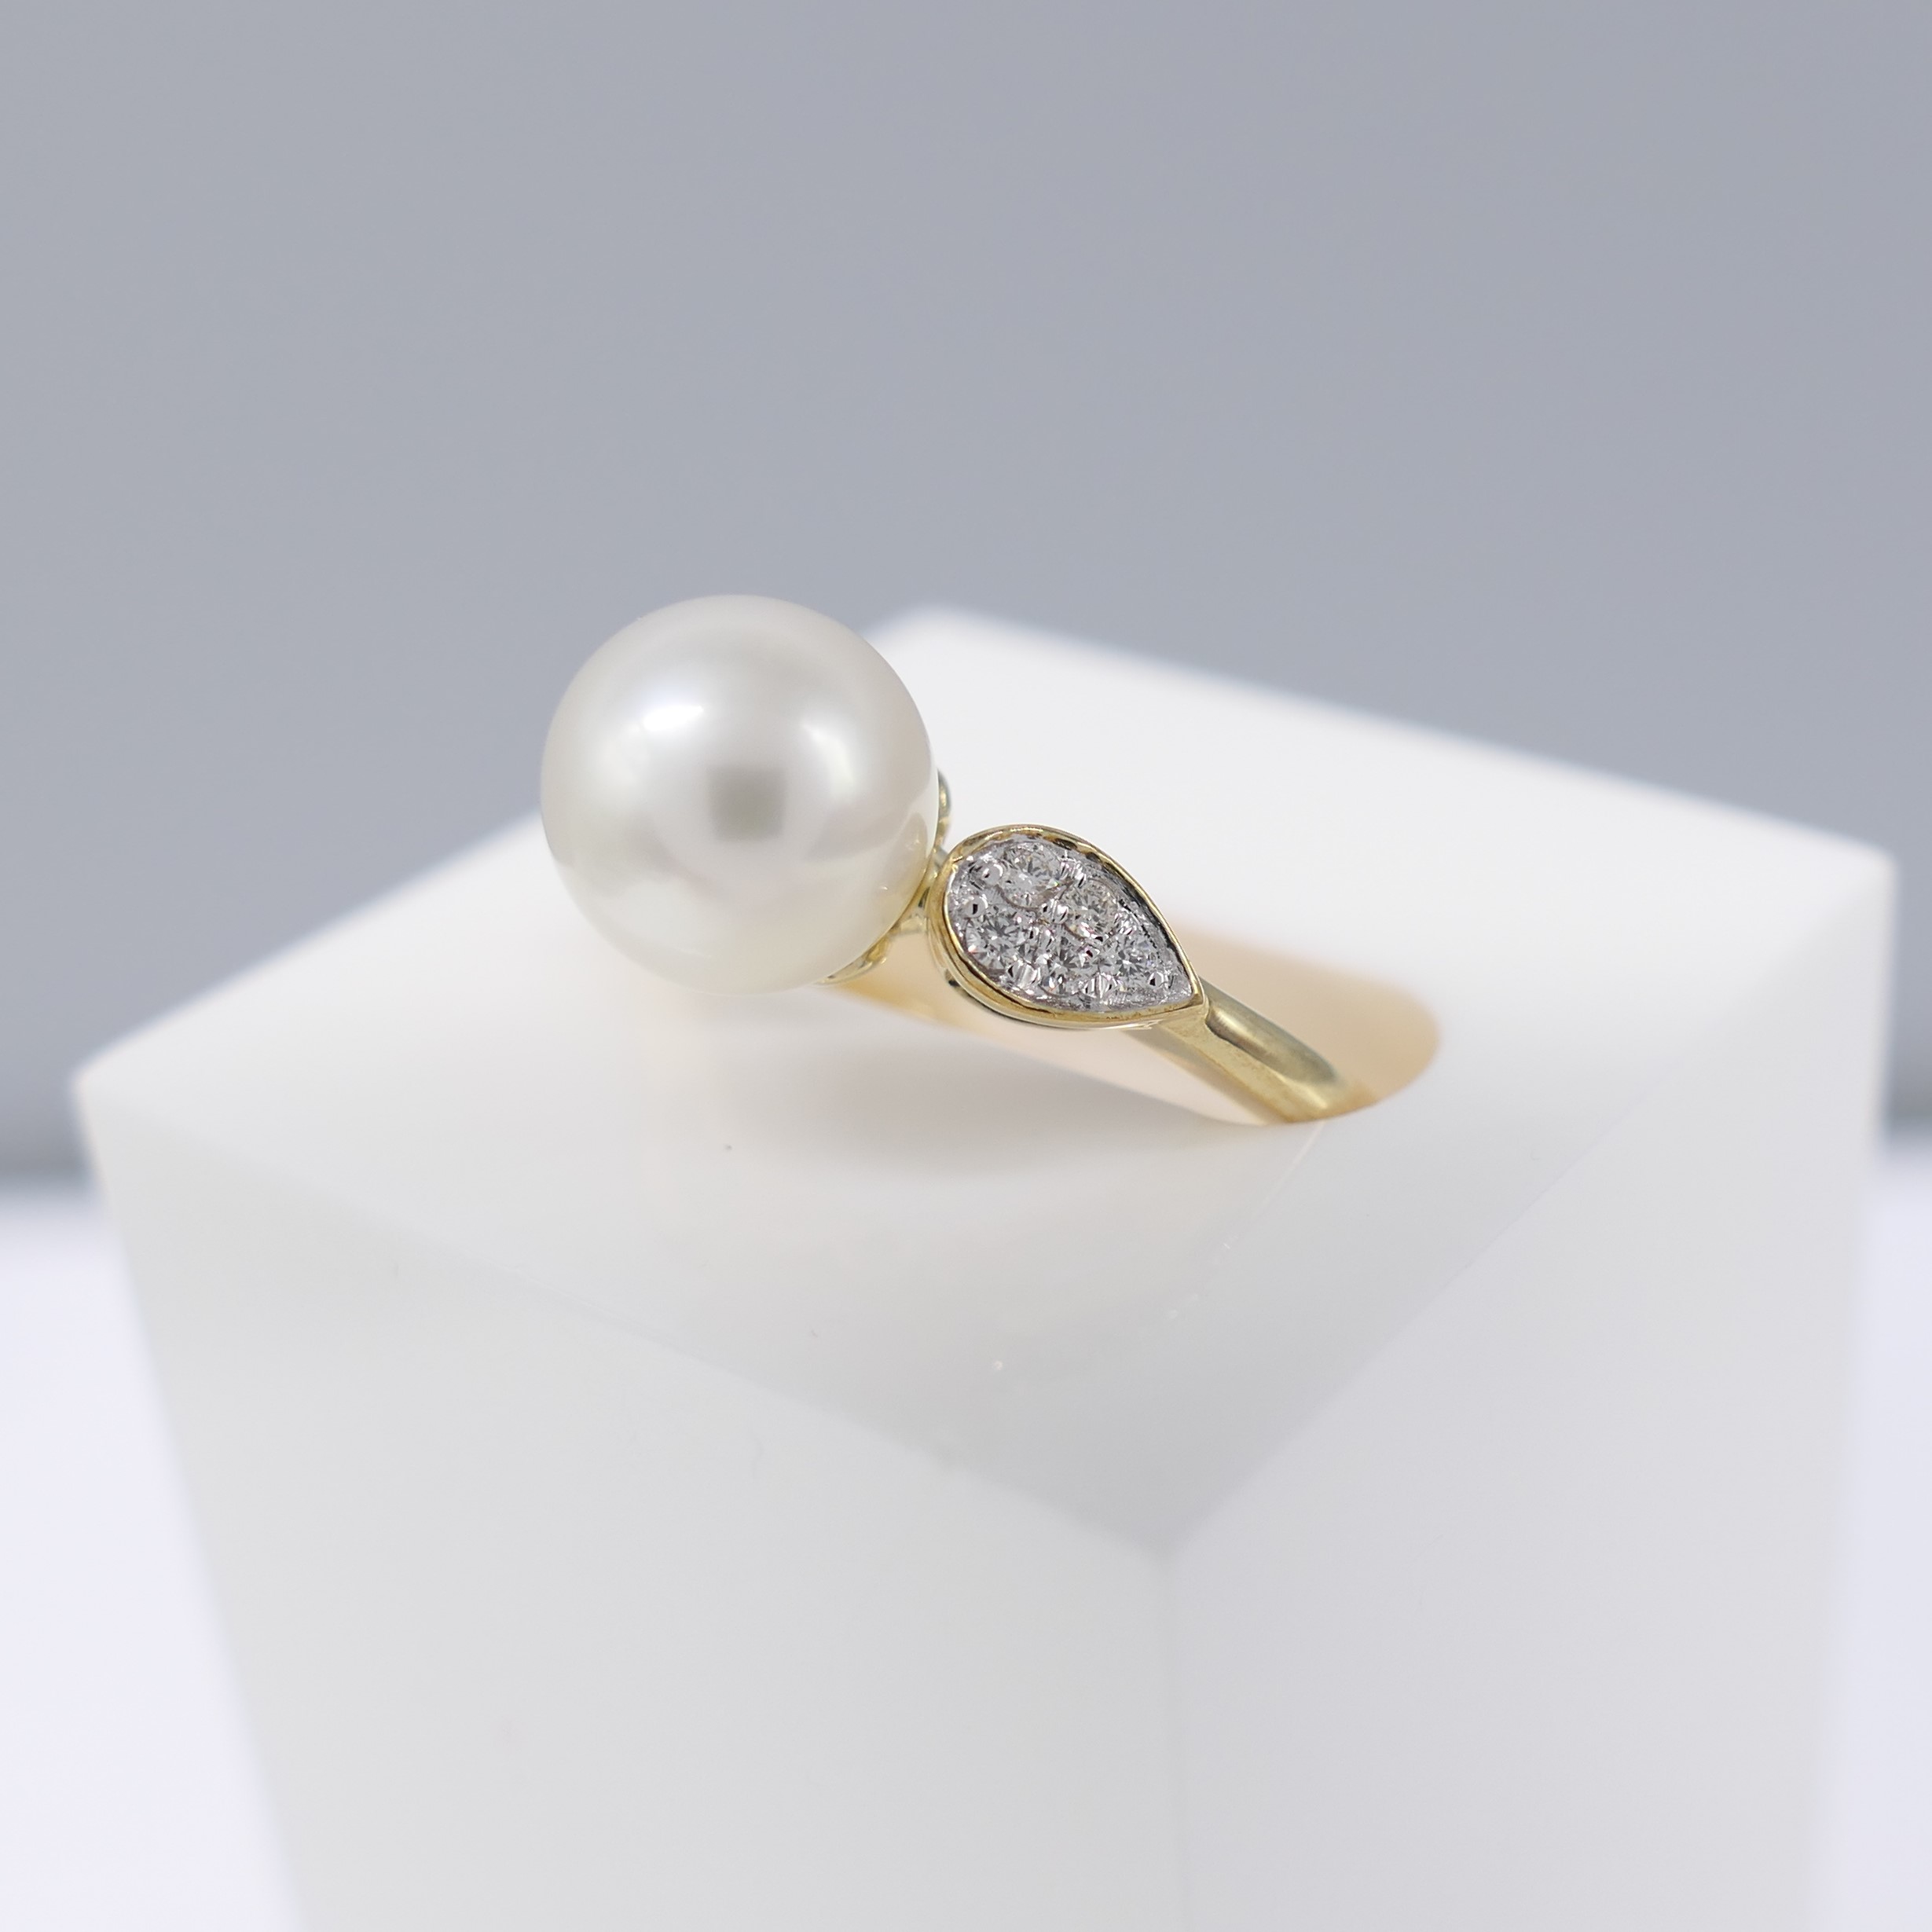 Cultured Pearl Dress Ring With Diamond-Set Shoulders, In Yellow Gold - Image 4 of 6